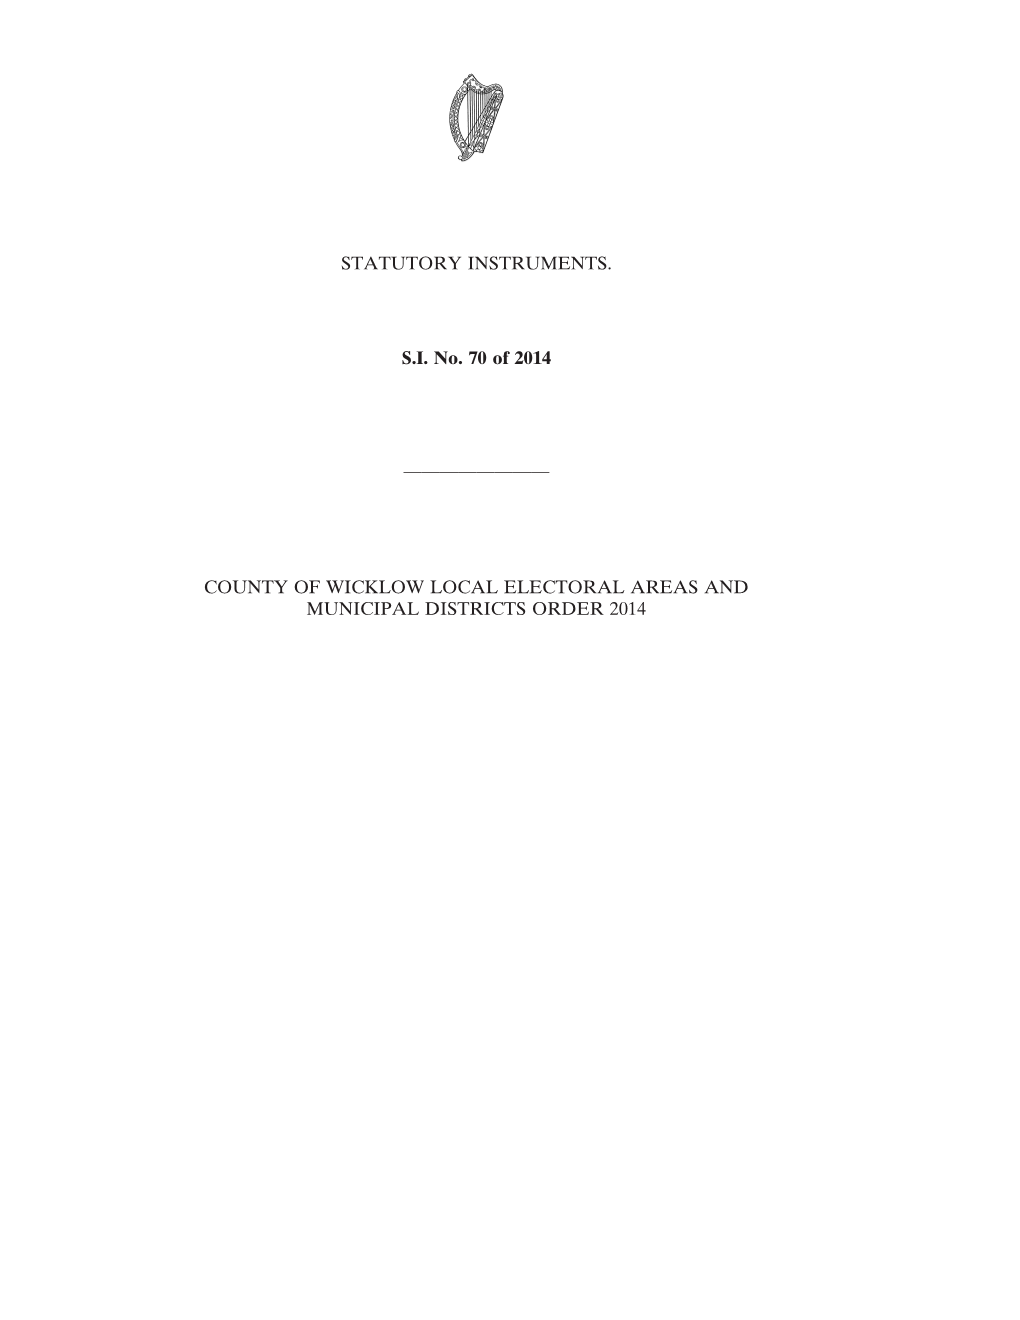 County of Wicklow Local Electoral Areas and Municipal Districts Order 2014 2 [70]